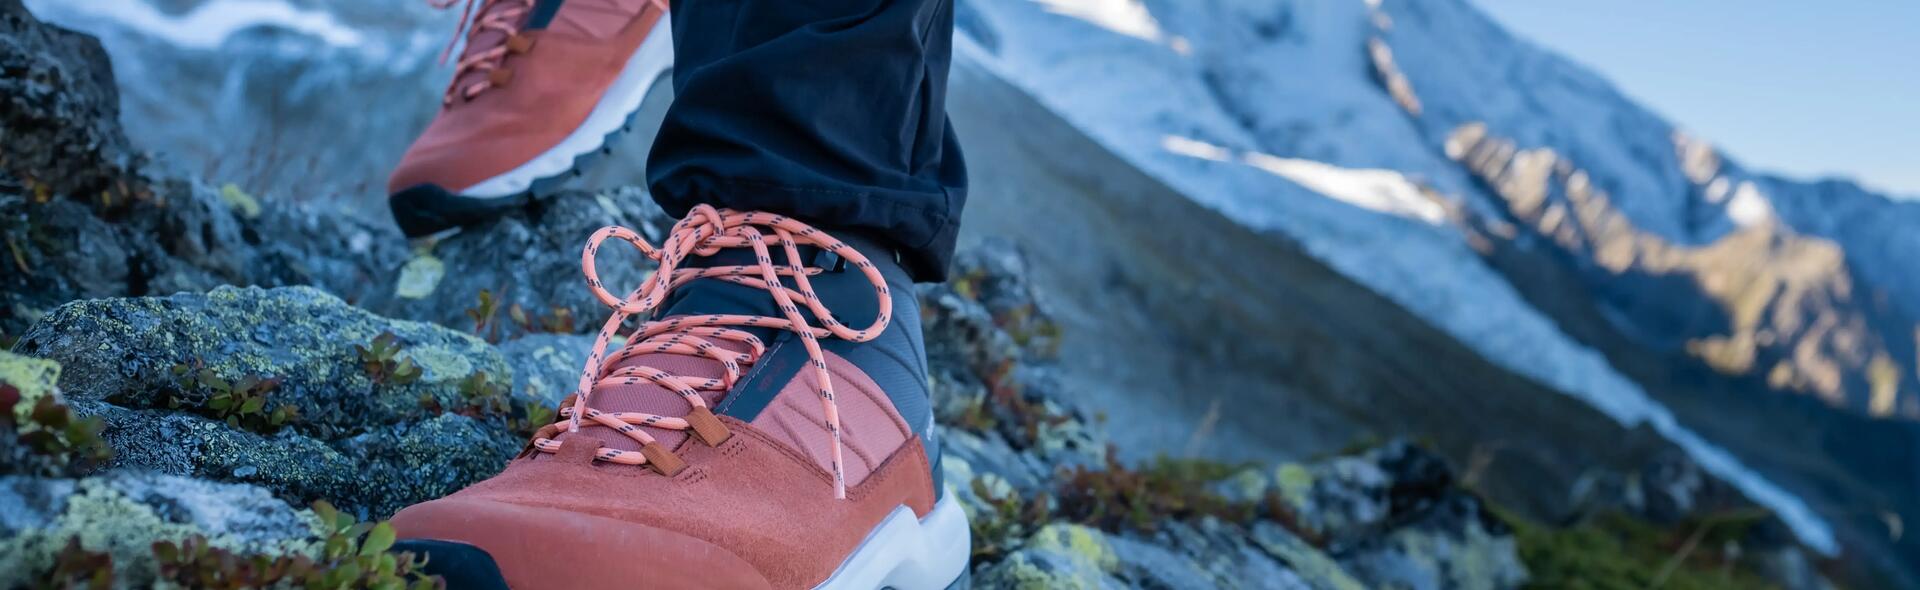 Contact technology: all-terrain hiking shoes